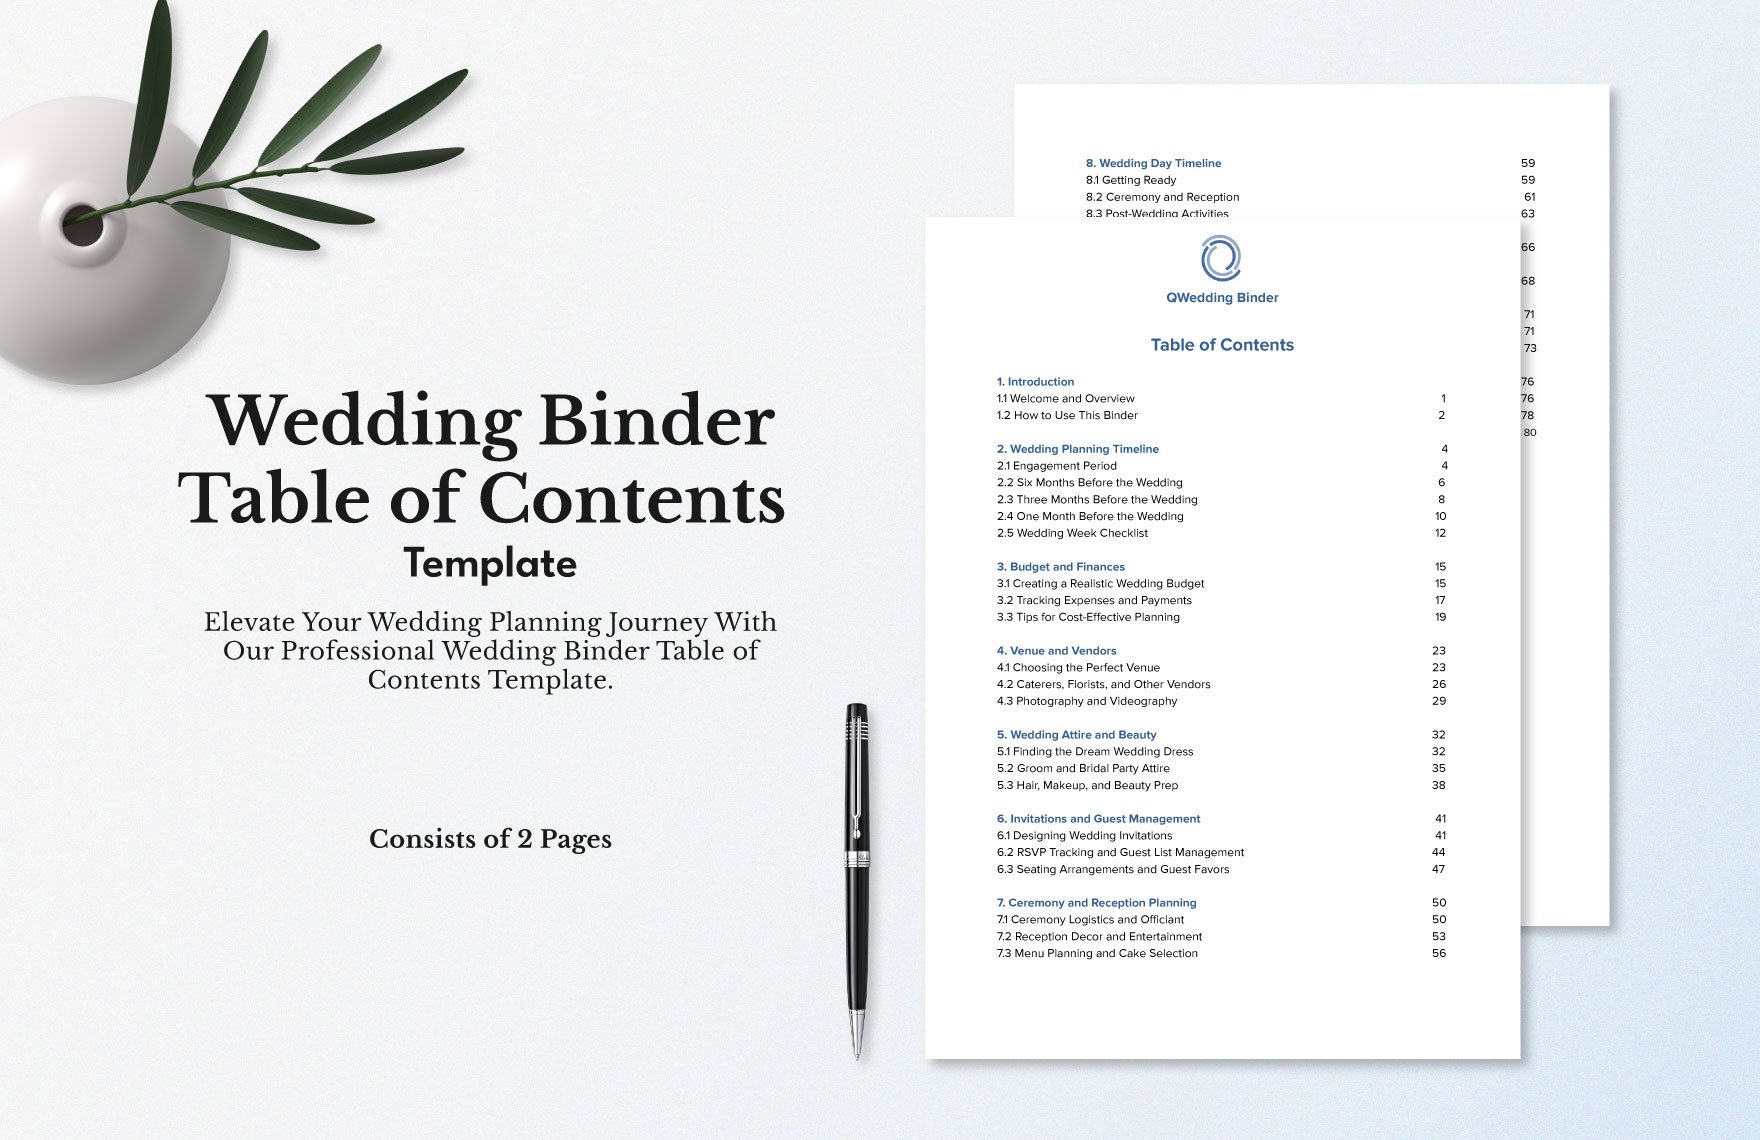 Wedding Binder Table of Contents Template